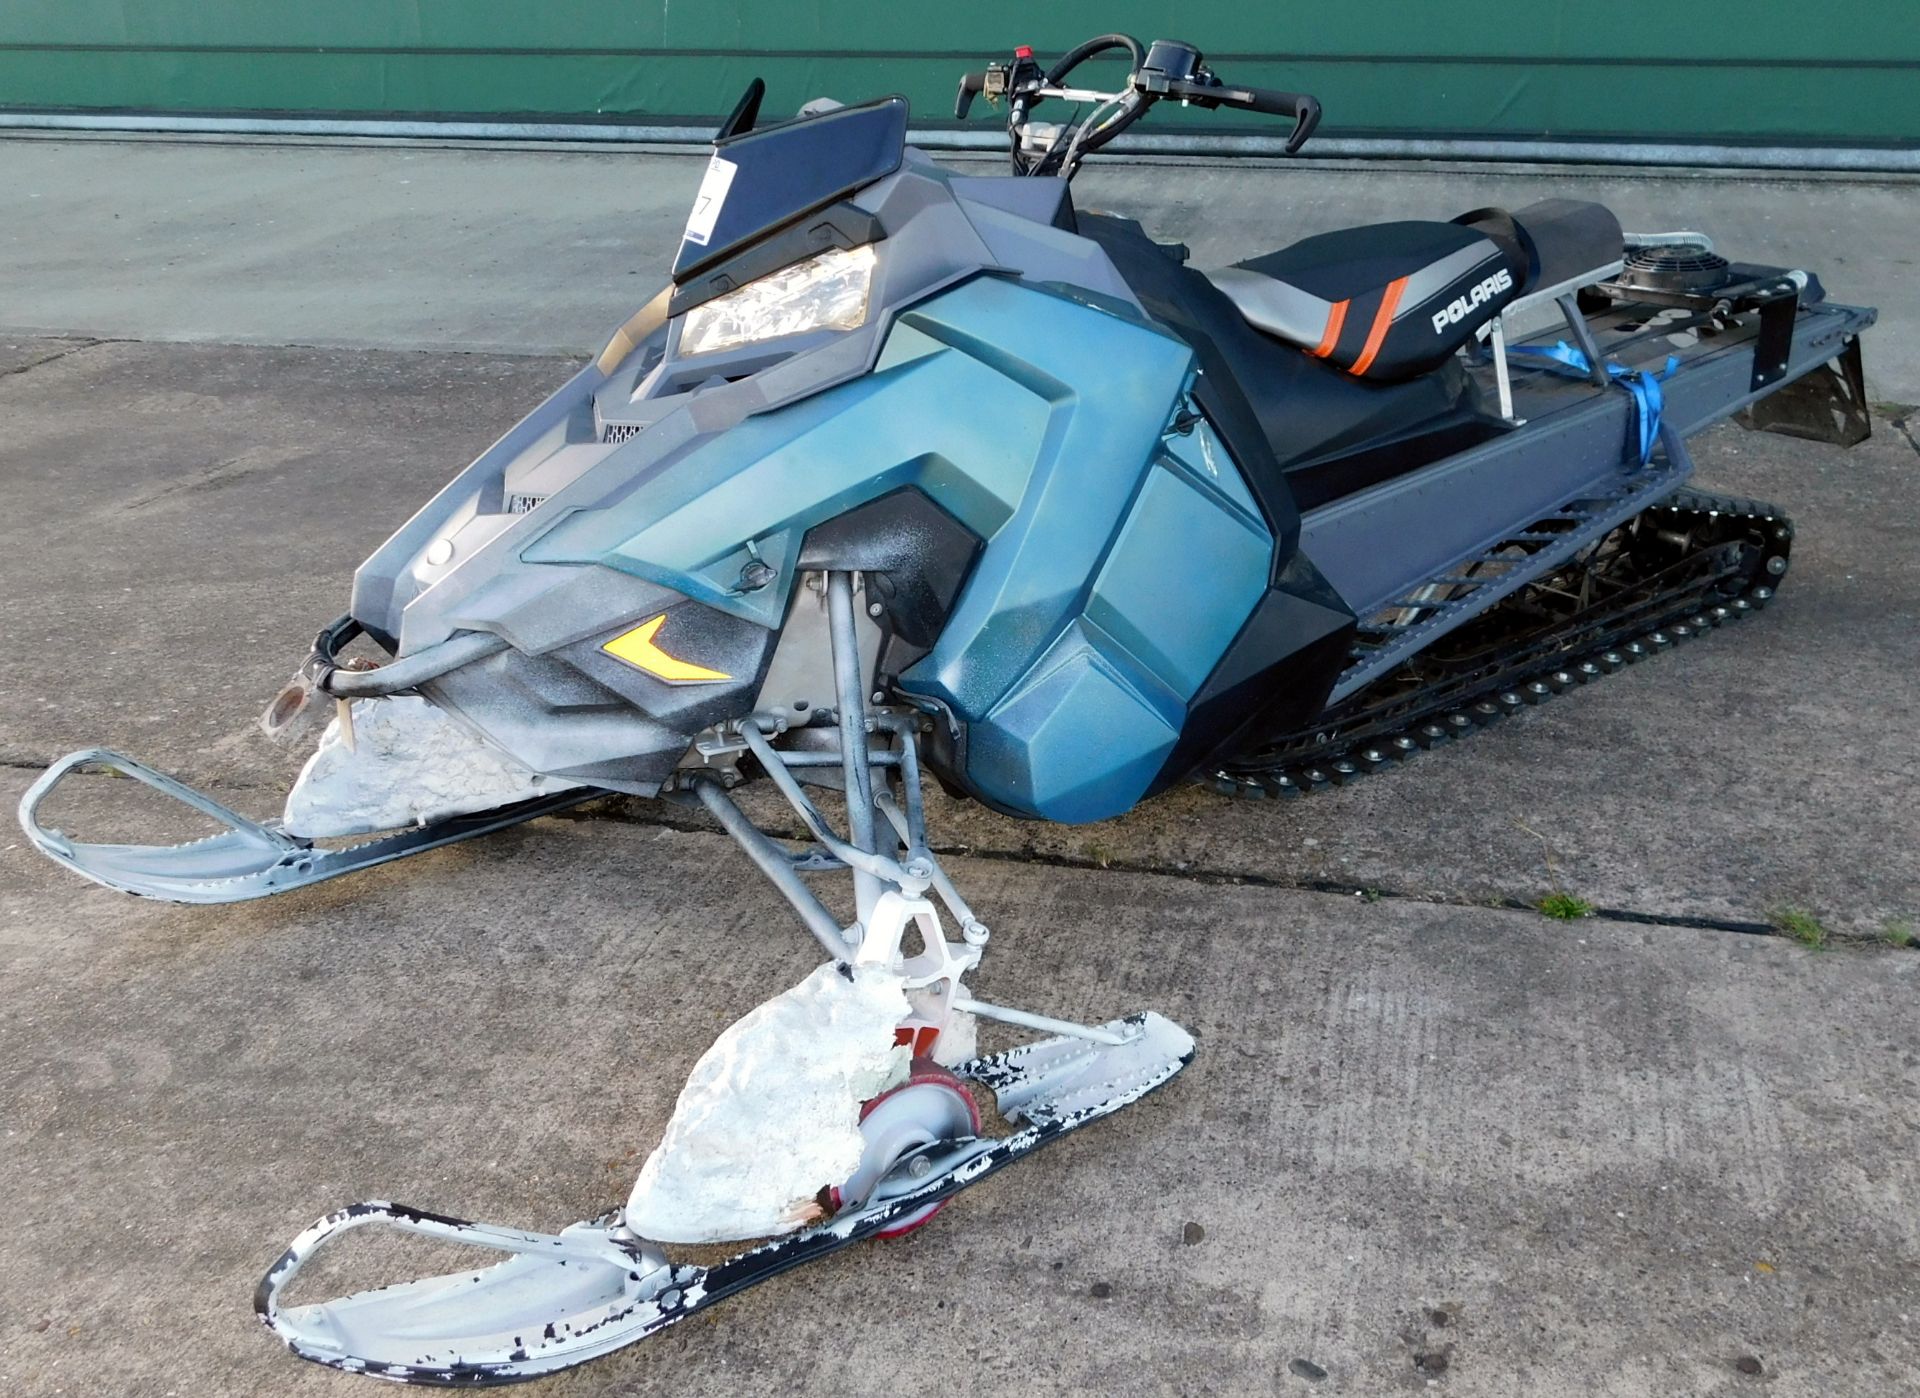 Polaris Assault RMX 800 Snowmobile (Skidoo 1), Twin Cylinder 795cc Two Stroke Engine, Modified Track - Image 3 of 7